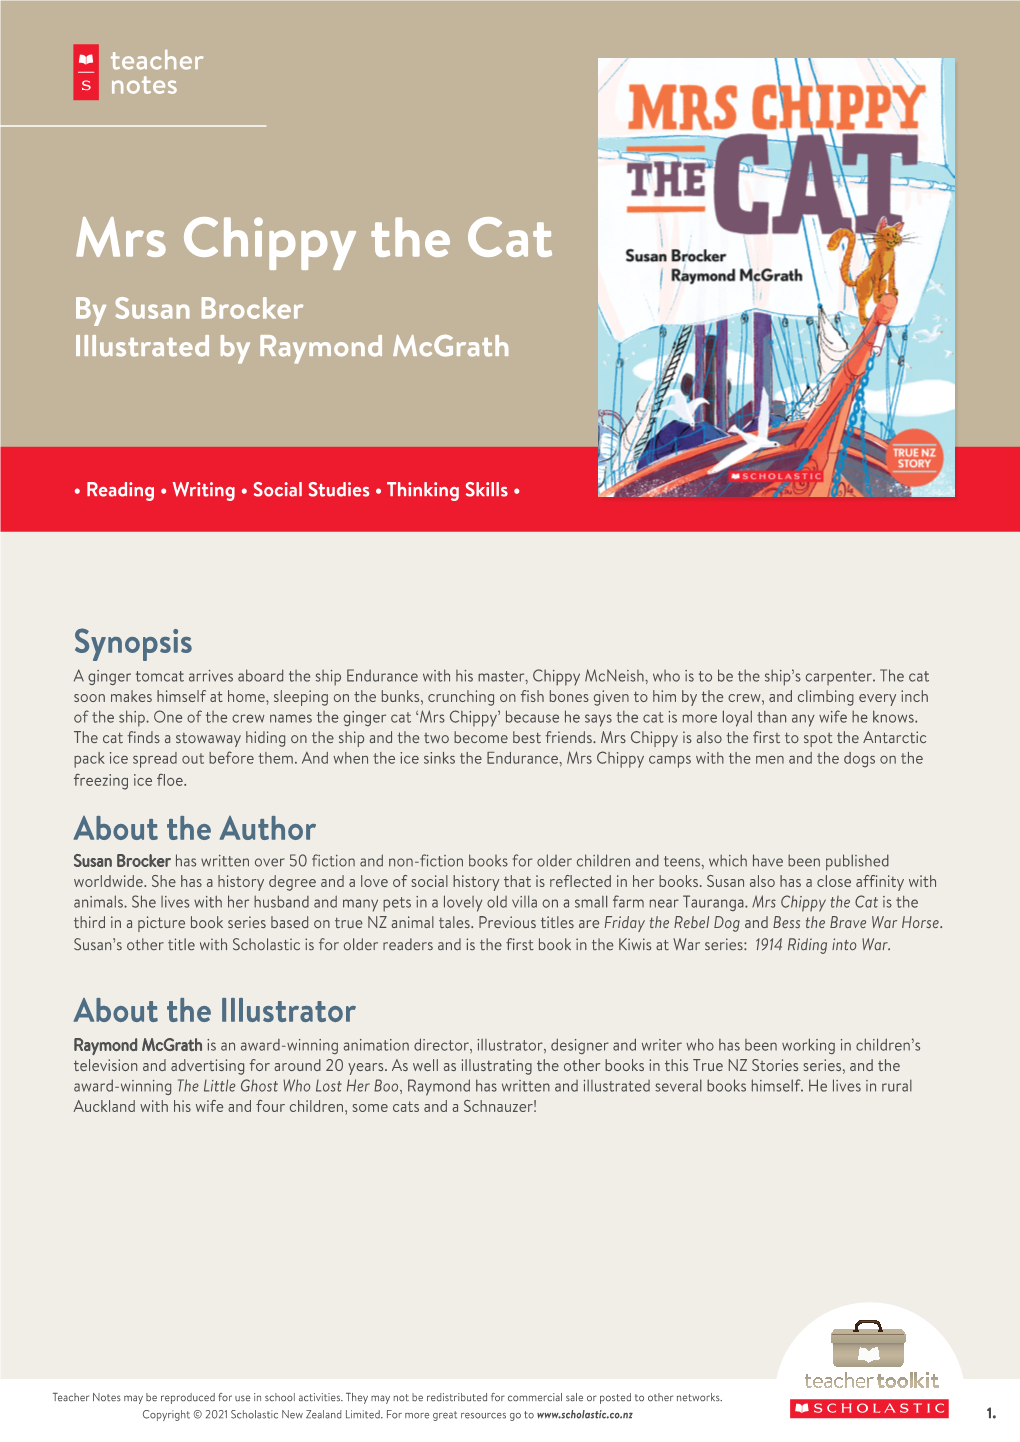 Mrs Chippy the Cat by Susan Brocker Illustrated by Raymond Mcgrath